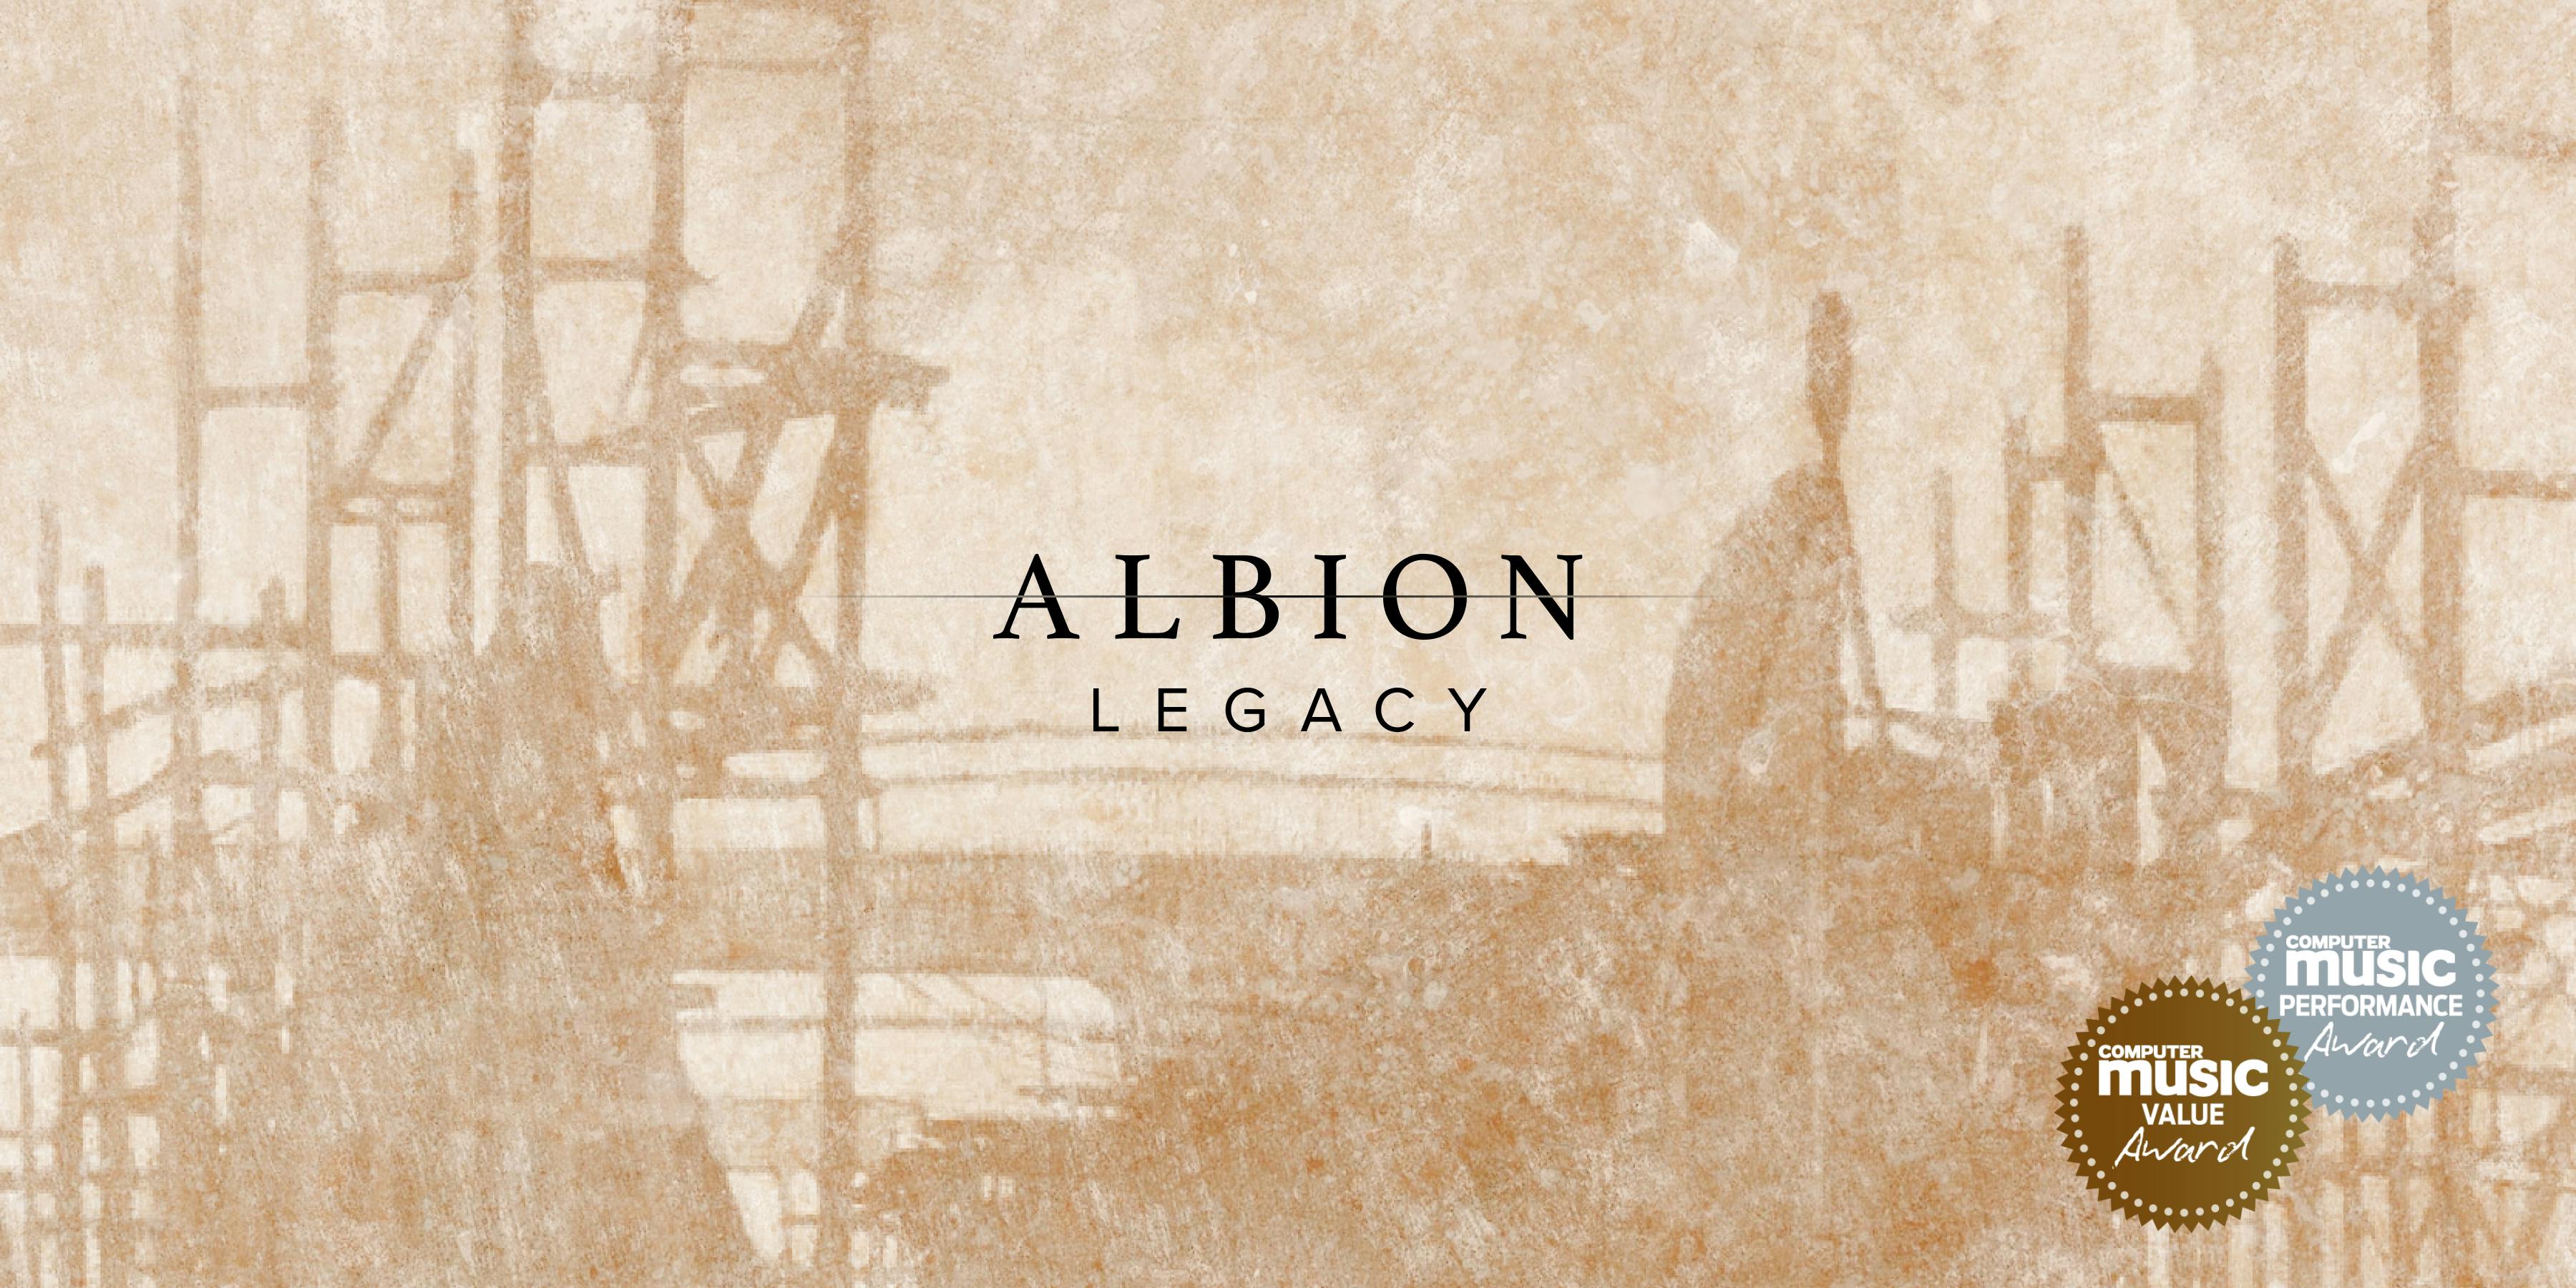 Albion Legacy artwork with Computer Music Performance and Value awards